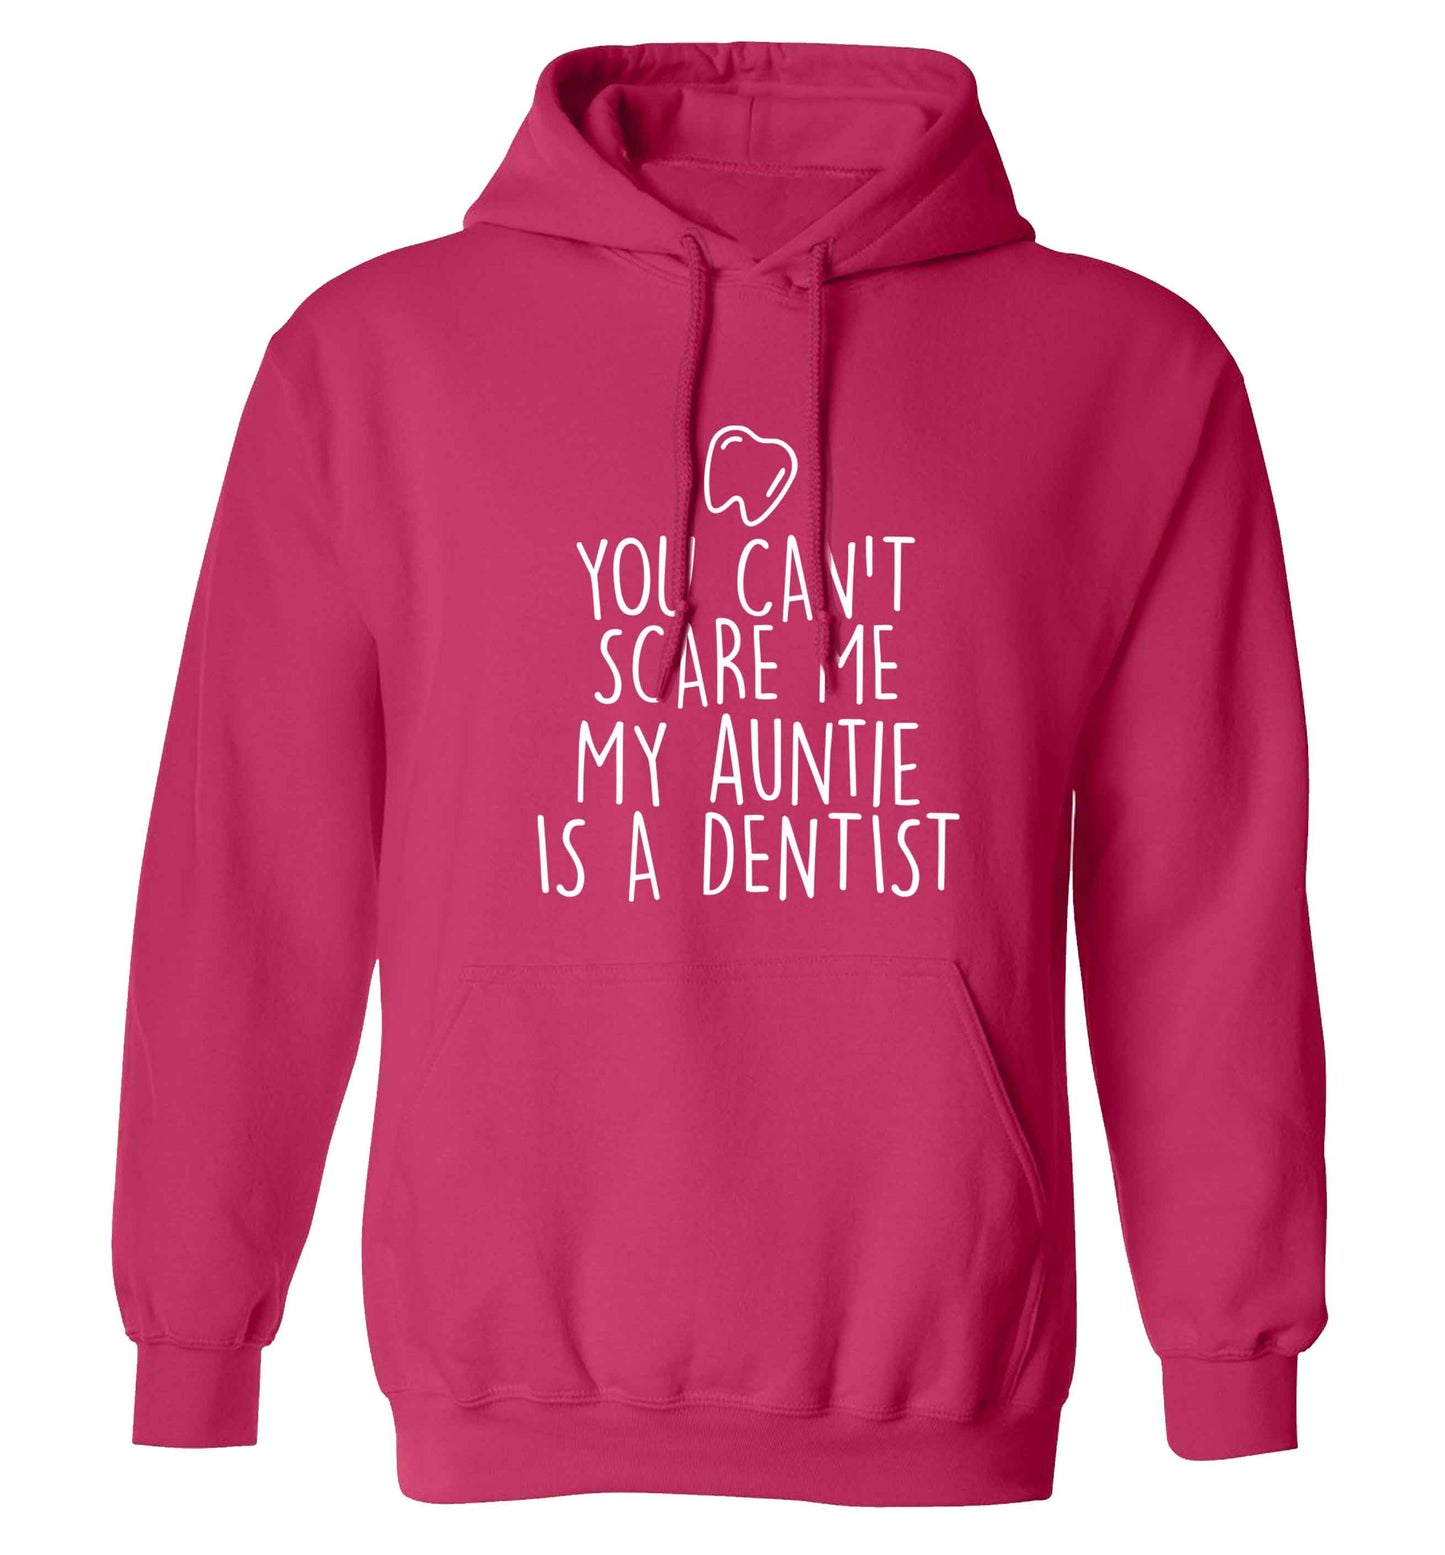 You can't scare me my auntie is a dentist adults unisex pink hoodie 2XL